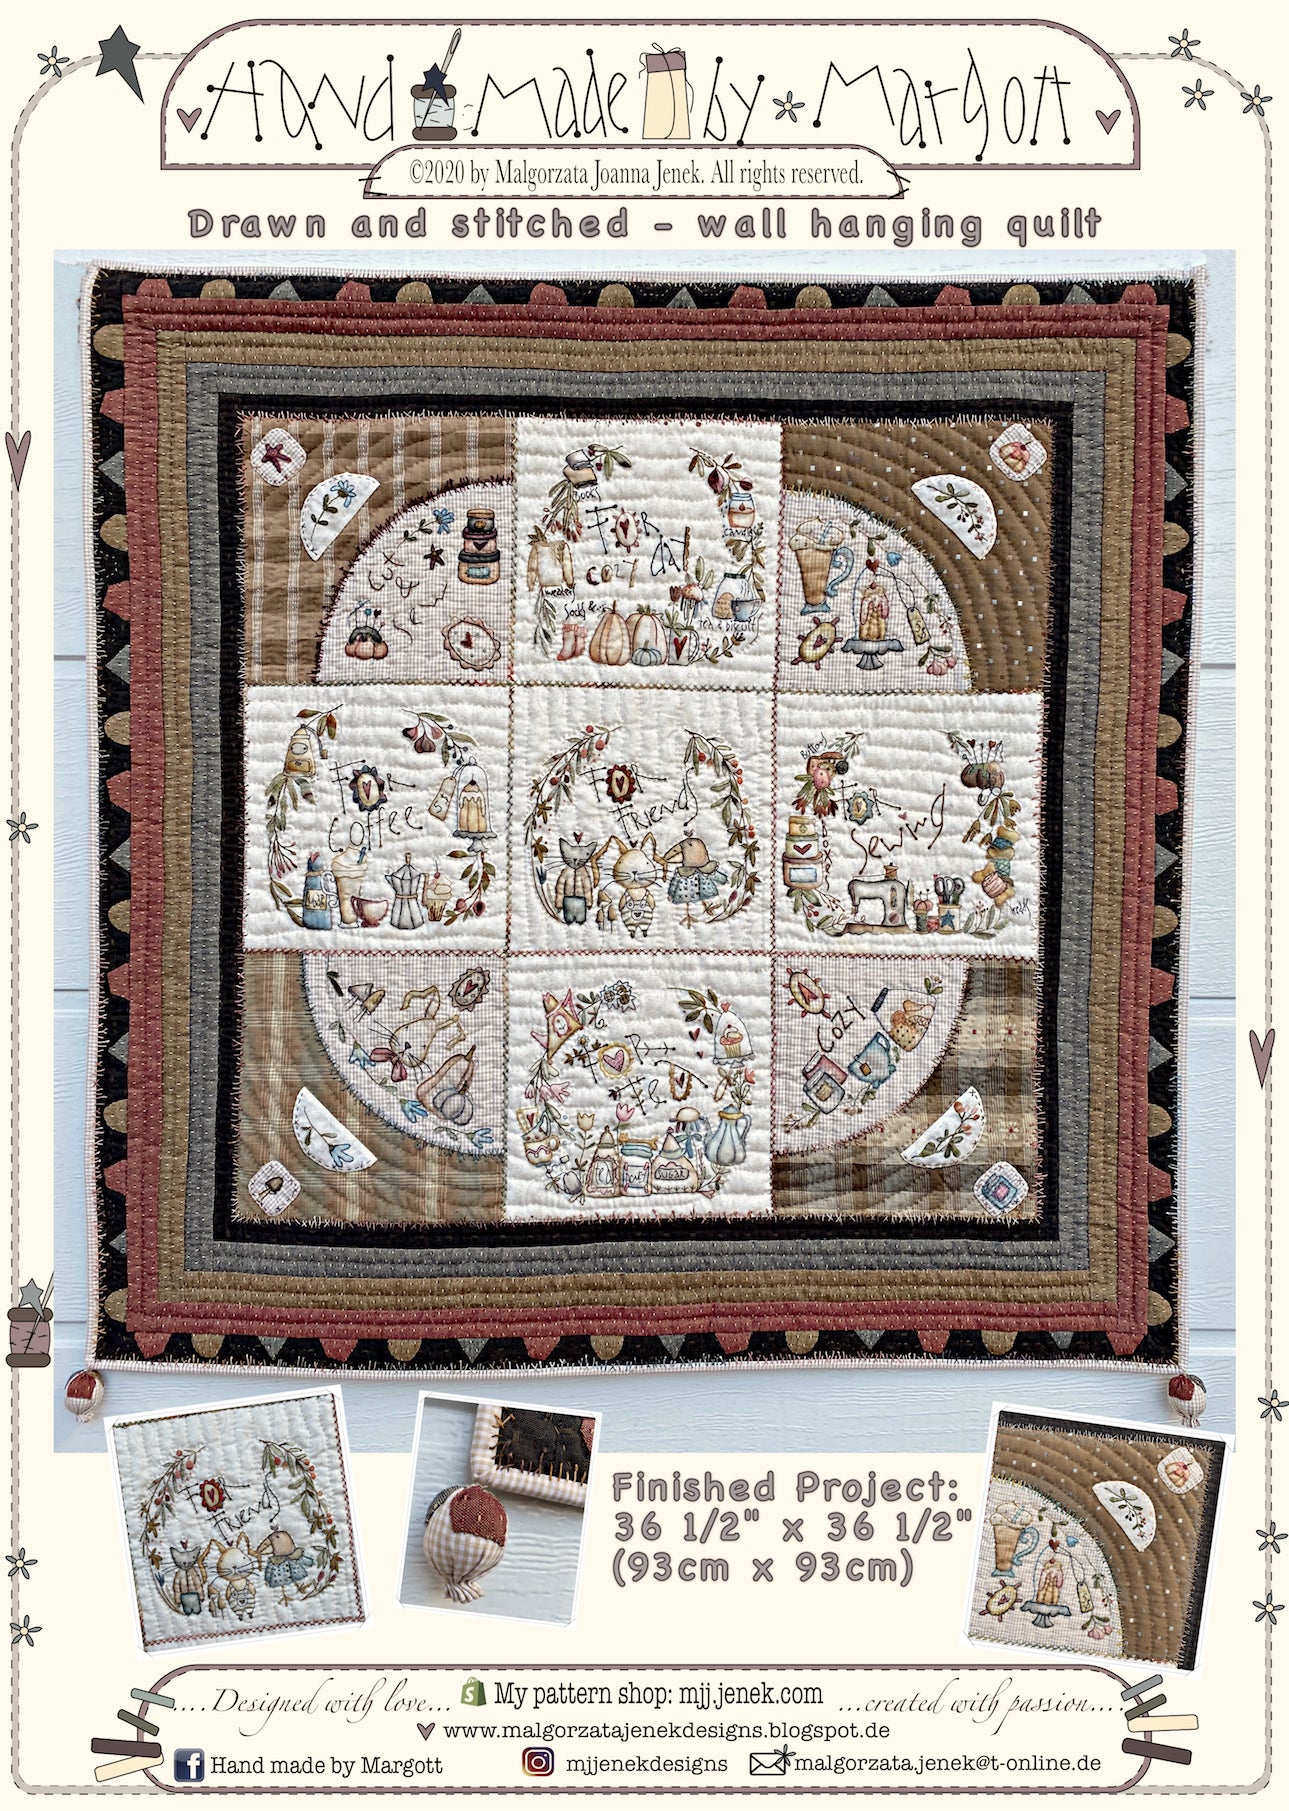 Drawn and stitched - wall hanging quilt,  Quilt pattern by MJJenek